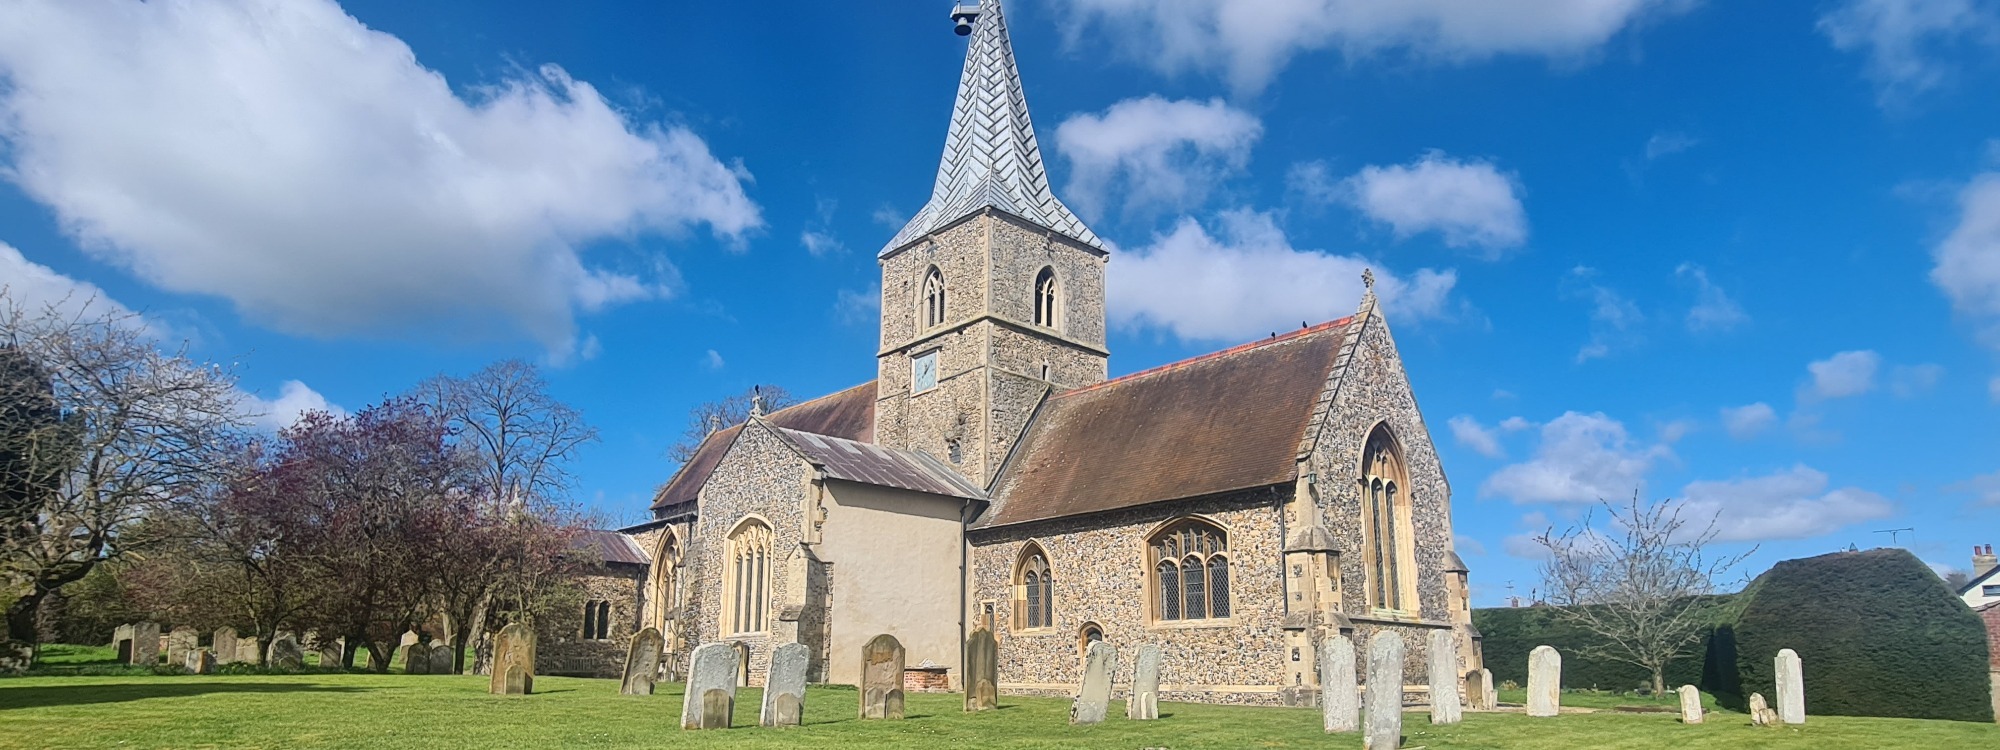 Welcome*St Mary Magdalene Ickleton*Learn more